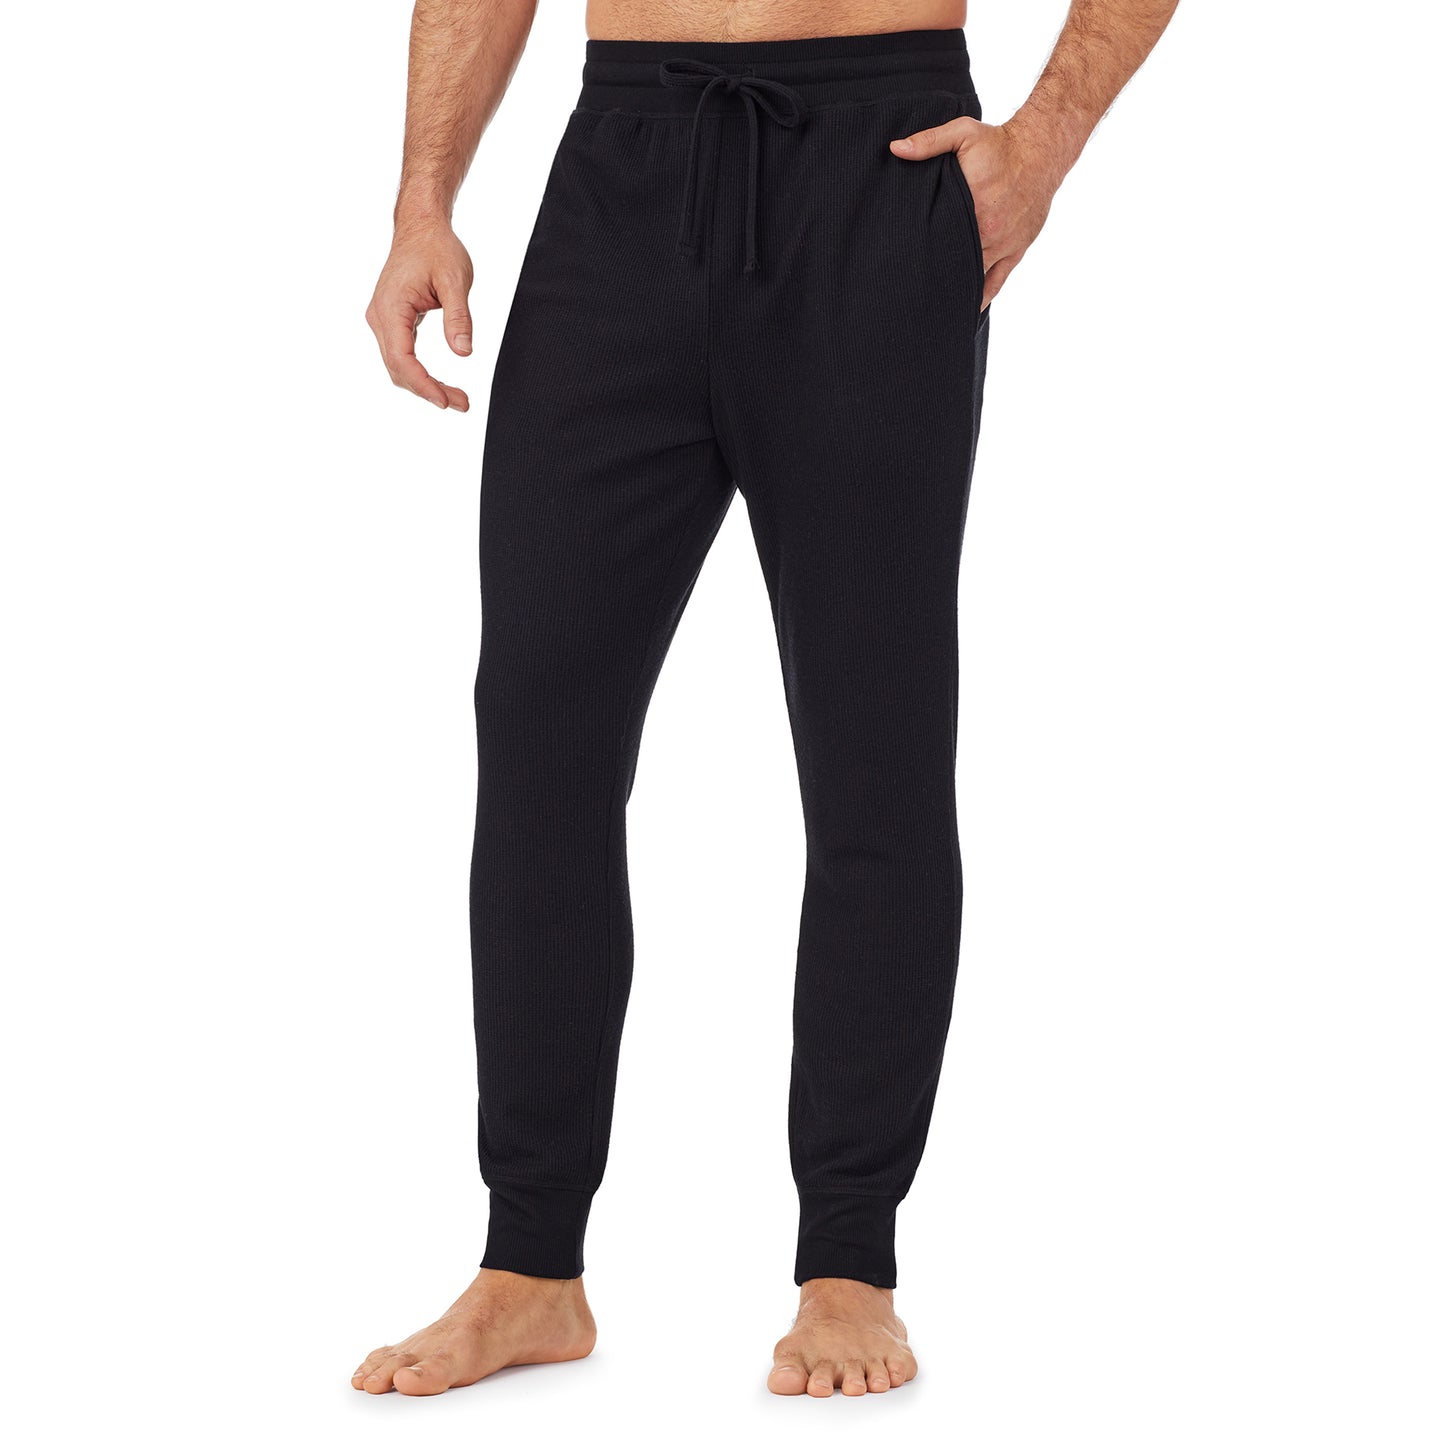 Black; Model is wearing size M. He is 6'1", Waist 31", Inseam 33". @A man wearing a black waffle thermal relaxed jogger pant.